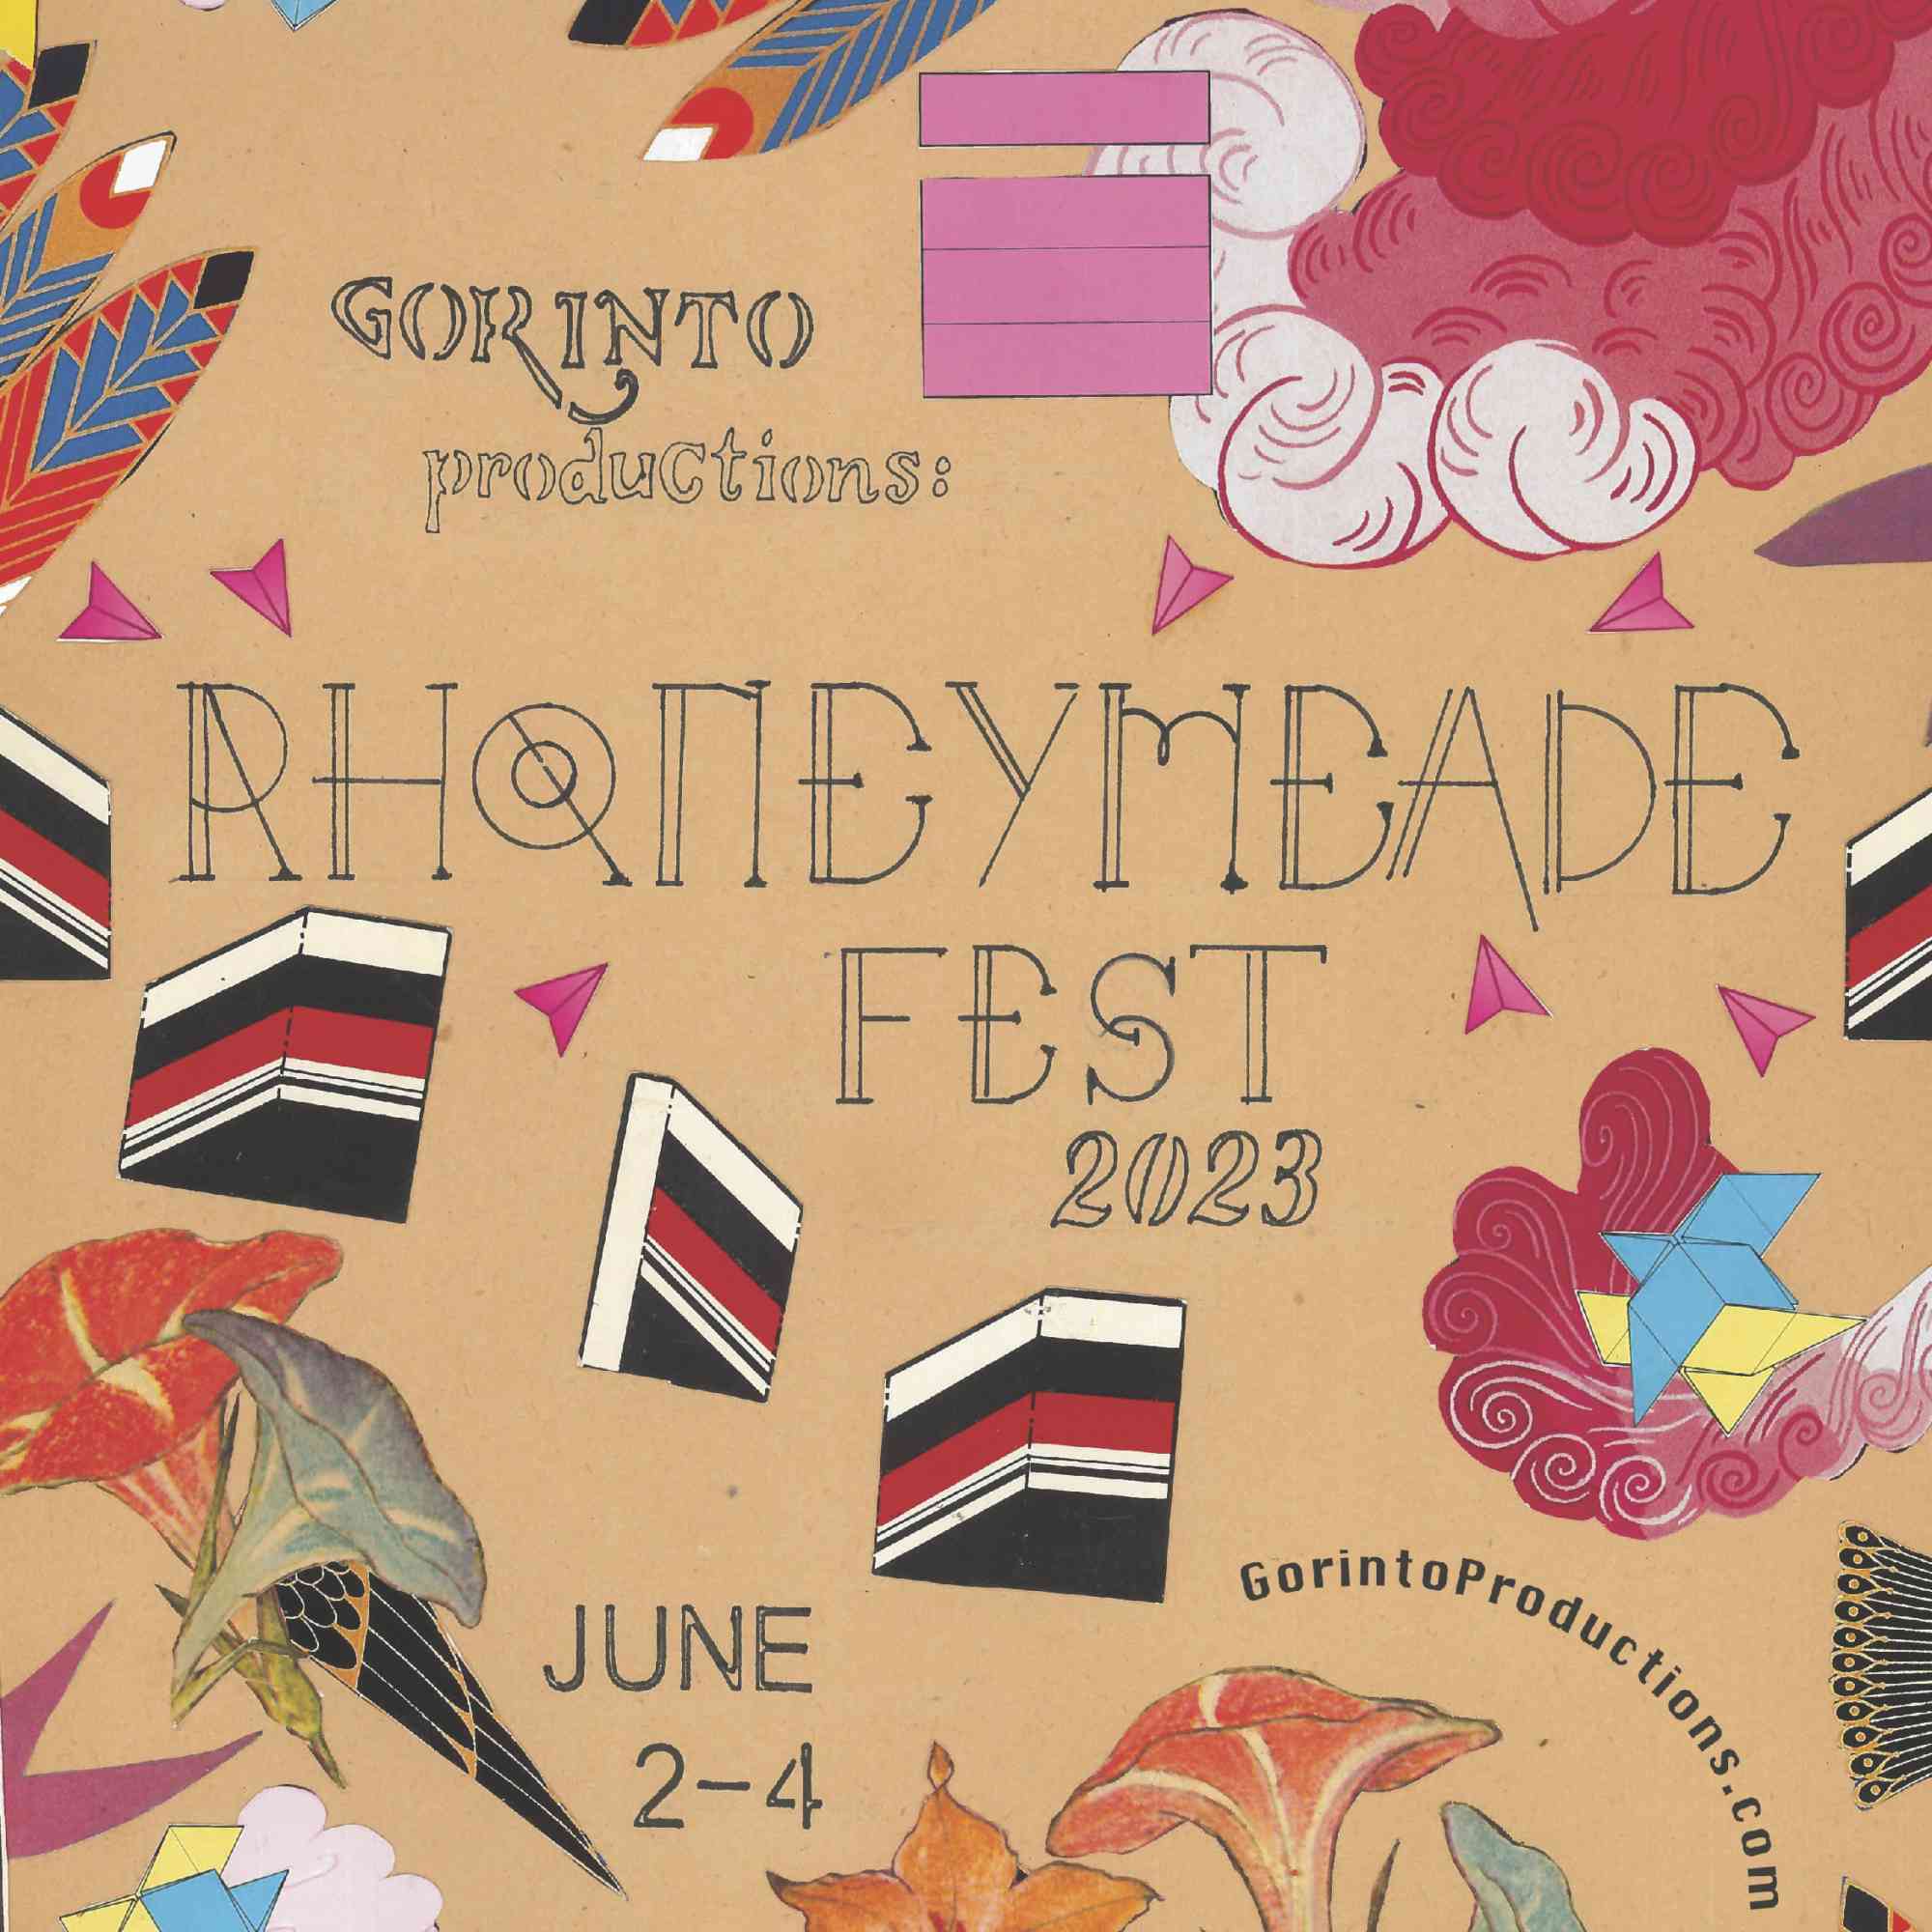 Central Pennsylvania's Rhoneymeade Fest features three days of eclectic